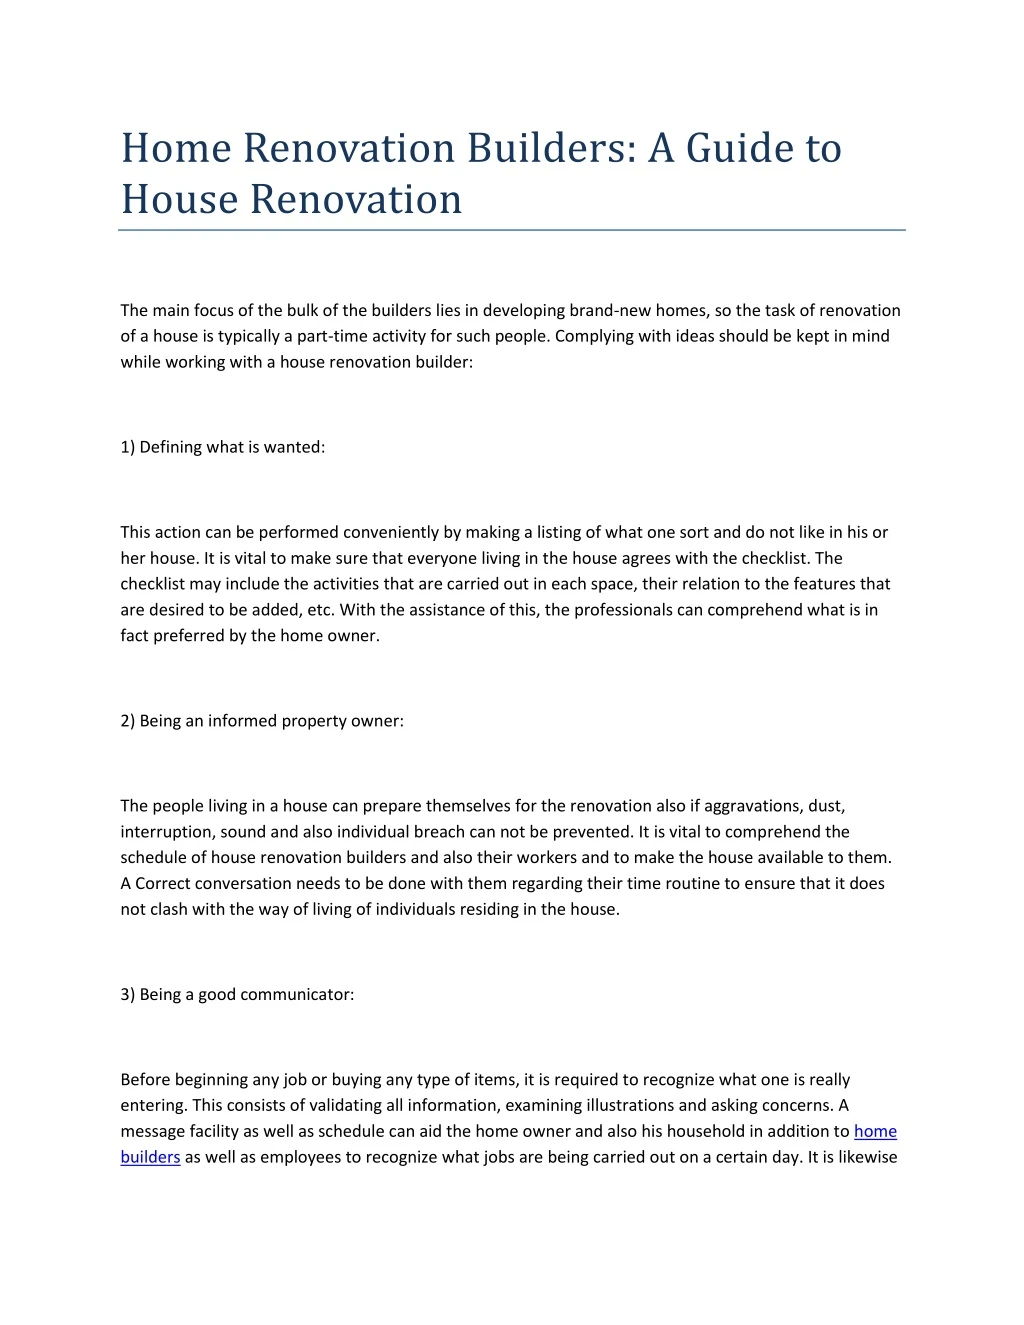 home renovation builders a guide to house